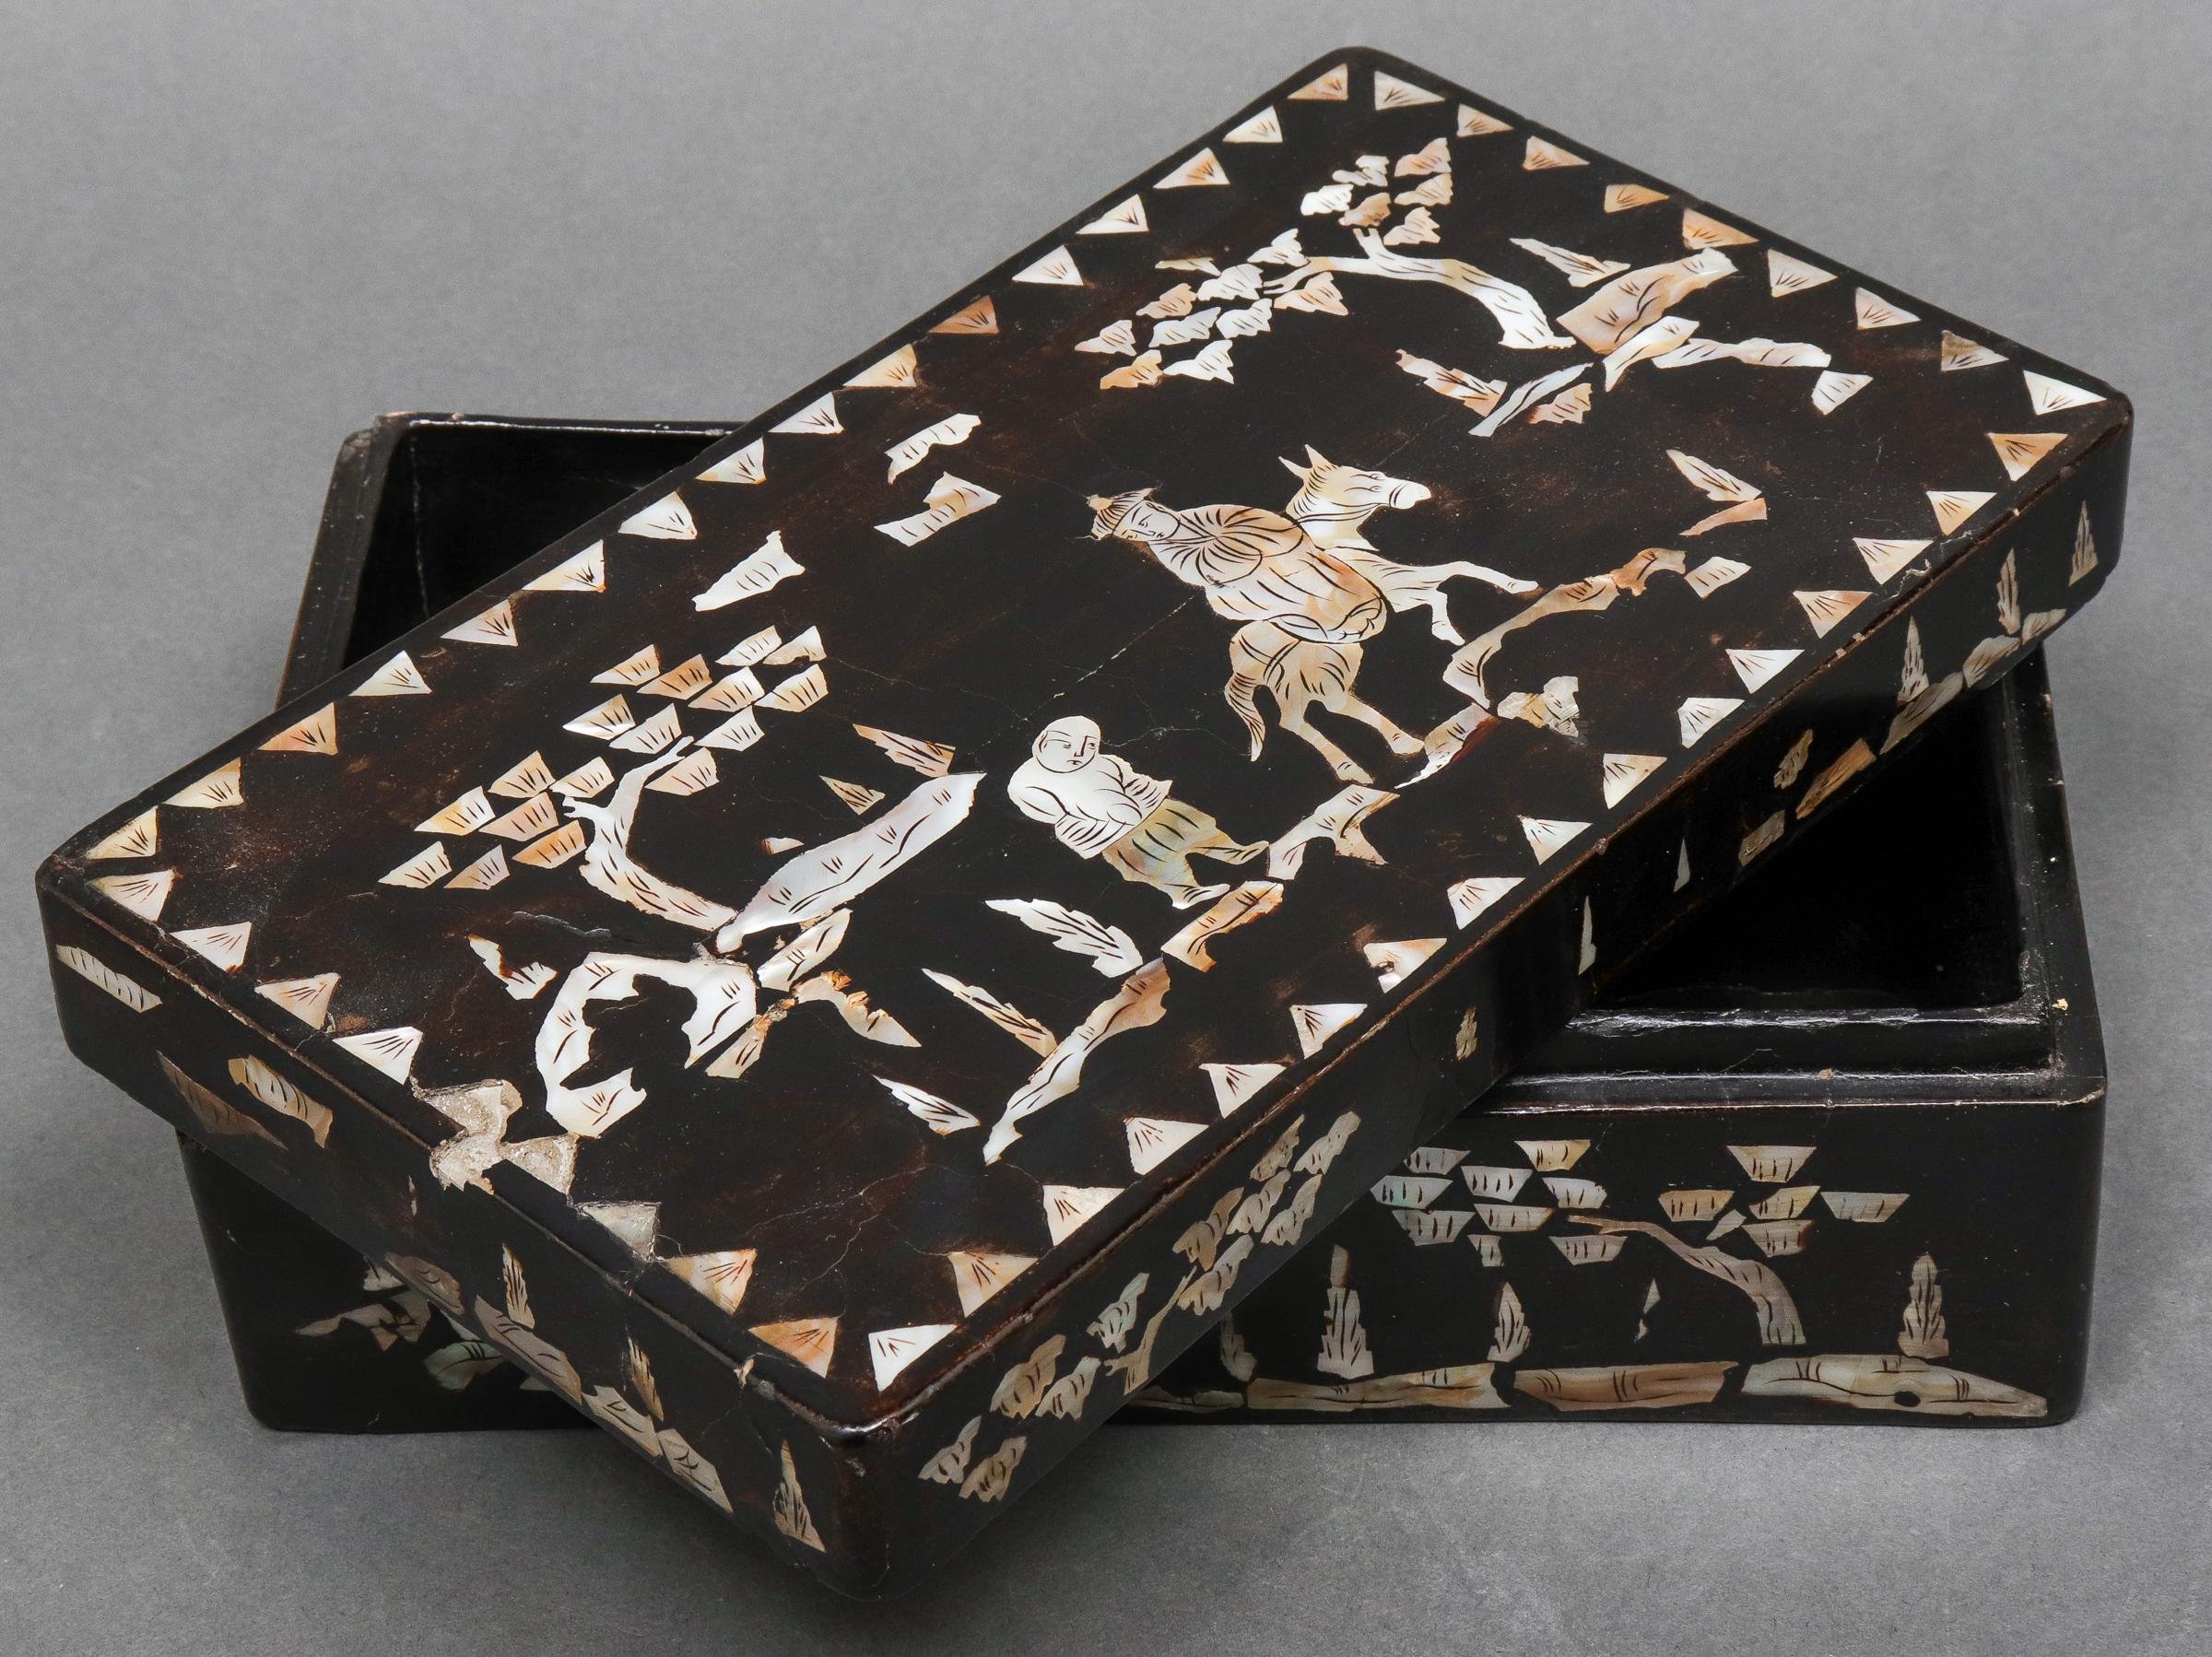 Chinese mother of pearl inlaid lacquered rectangular box, depicting in landscape, circa late 19th-early 20th century. Measures: 3.5